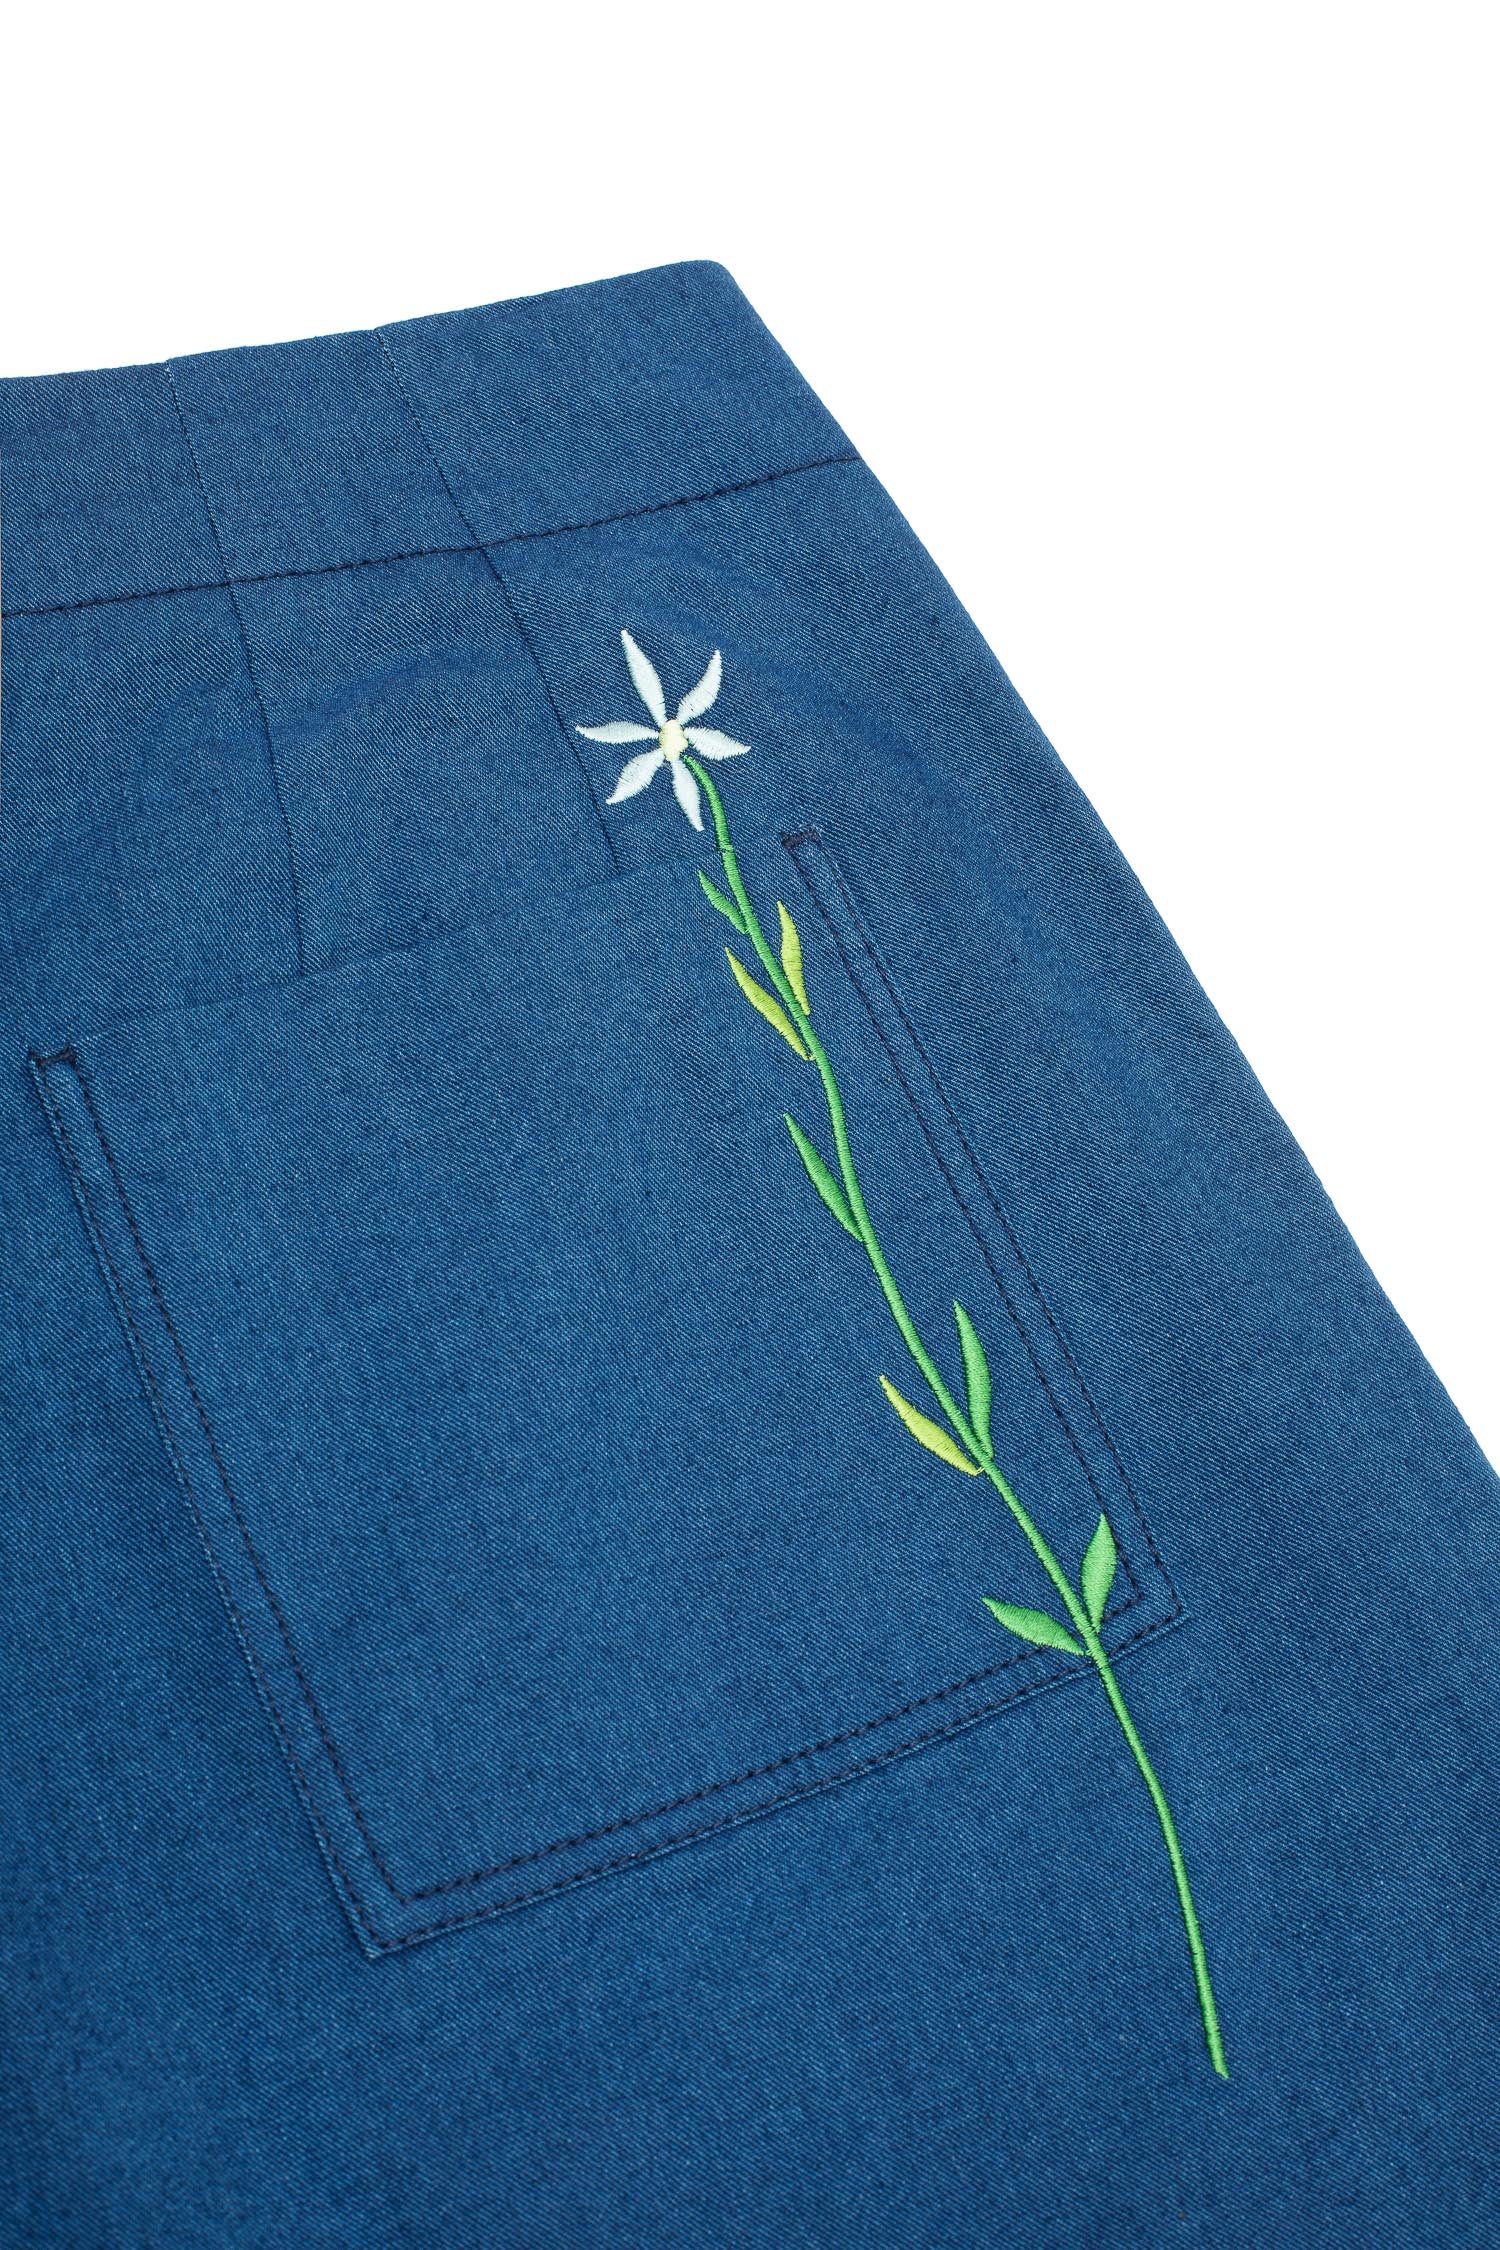 Womens wide leg culotte trouser in Japanese Denim. Amelia Wide Leg Trouser by Saywood. Natural indigo, cotton. Back close up of patch pocket and blue embroidered flower